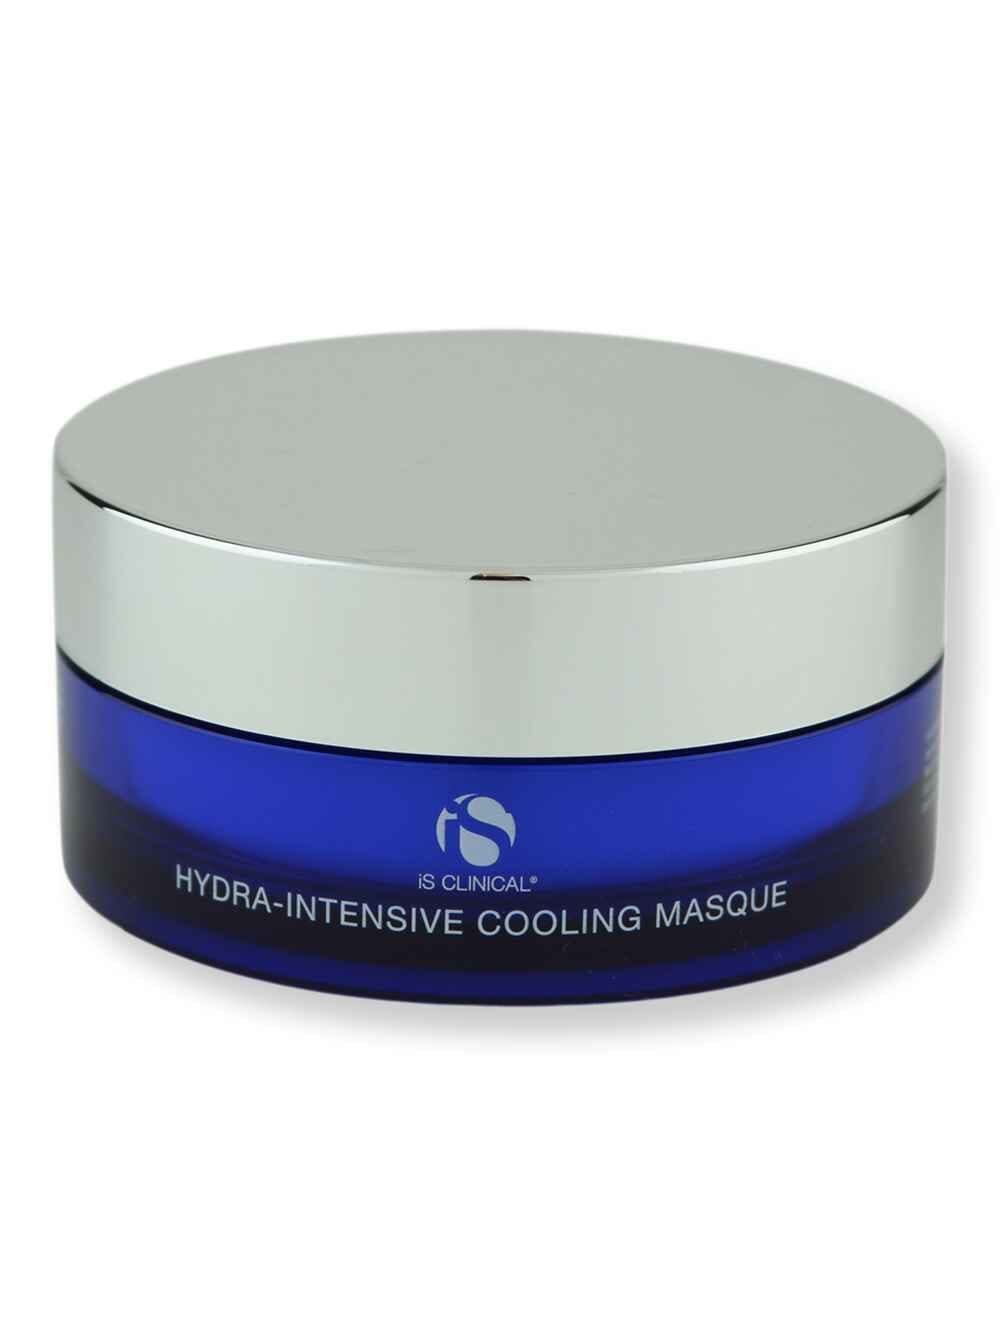 iS Clinical iS Clinical Hydra-Intensive Cooling Masque 4 oz120 g Face Masks 